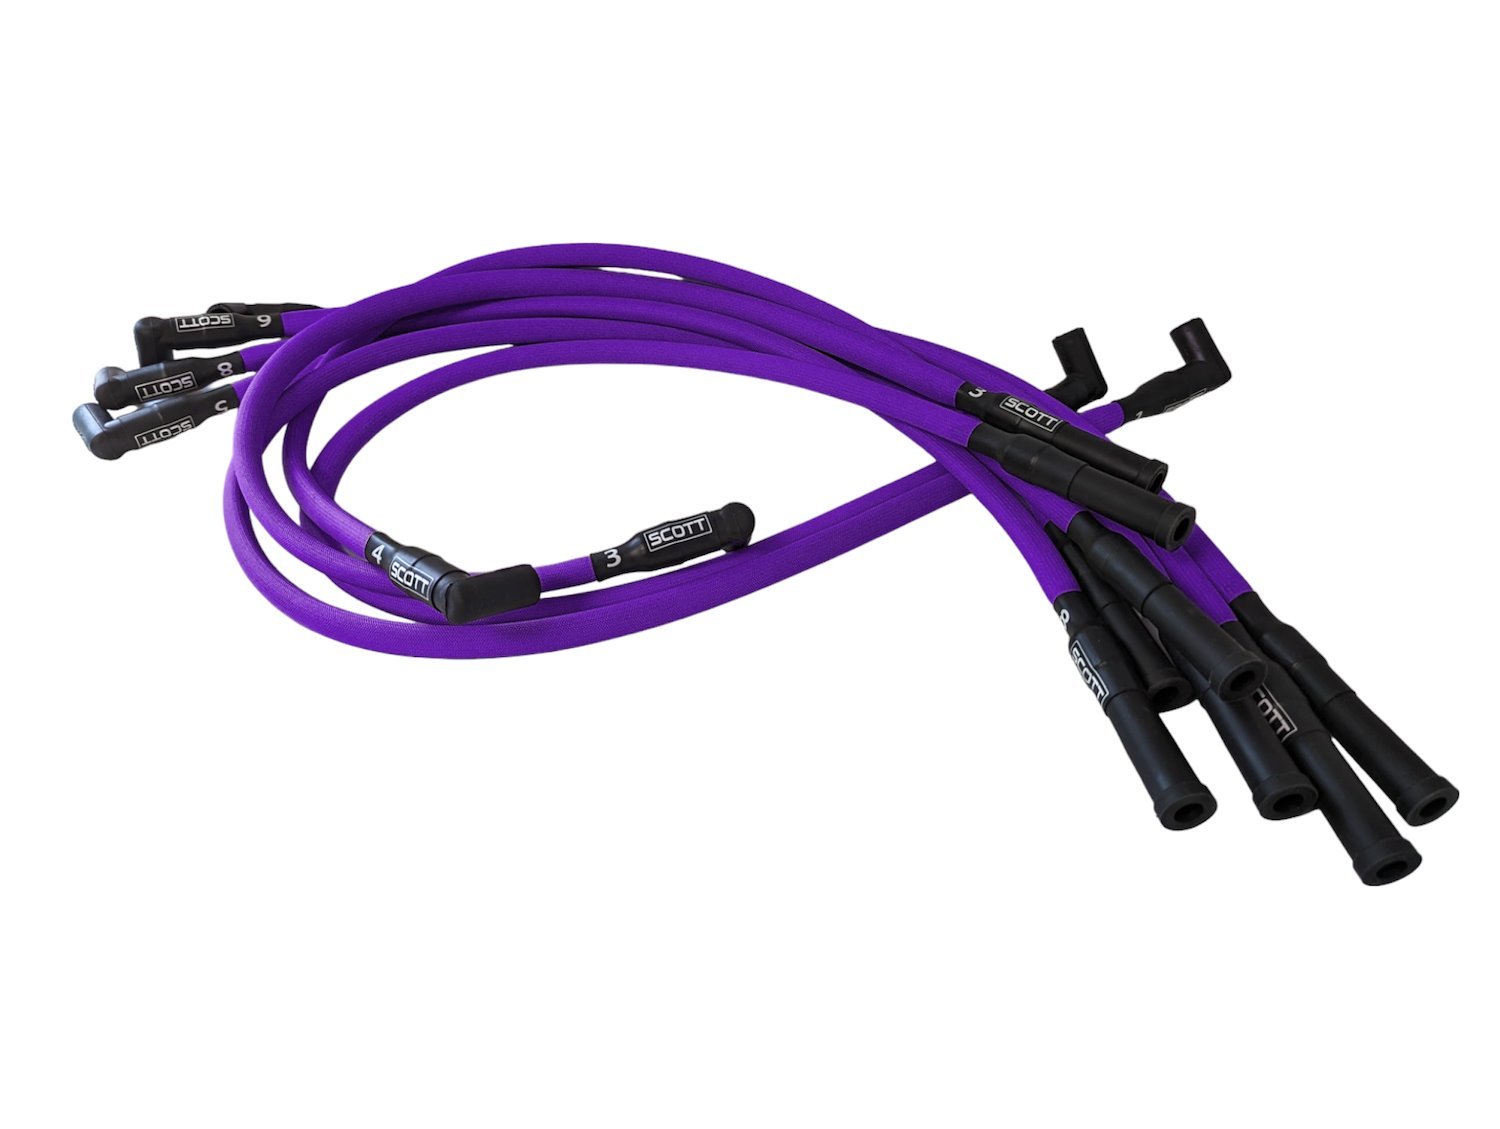 SPW300-PS-428-7 Super Mag Fiberglass-Oversleeved Spark Plug Wire Set for Big Block Ford FE [Purple]